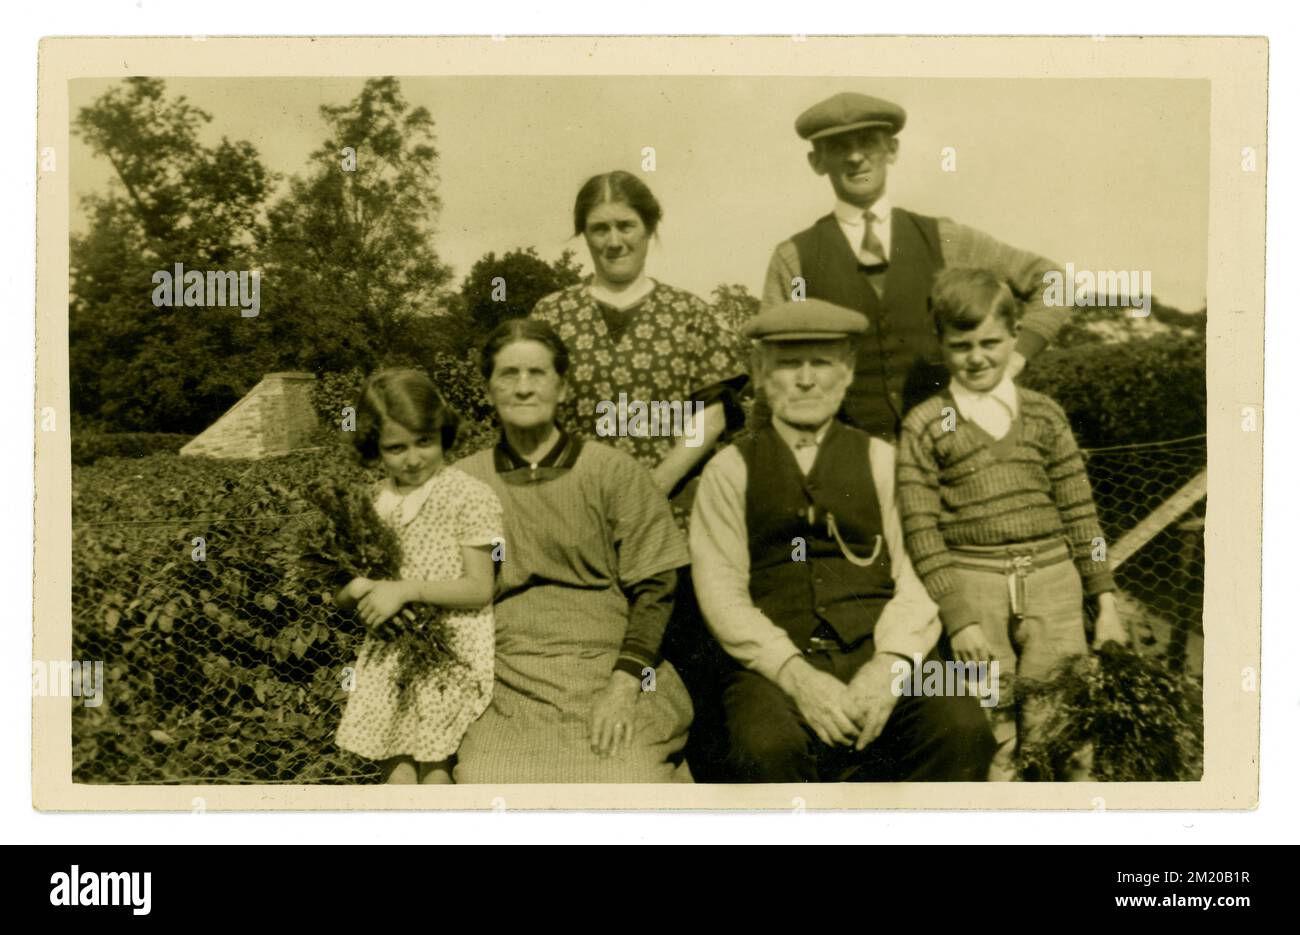 Original early 1930's era postcard of young children visiting their older rural farming relatives, grandparents or aunts and uncles on a British farm, growing vegetables. The men wear flat caps and suits and the women housecoats. U.K. Stock Photo